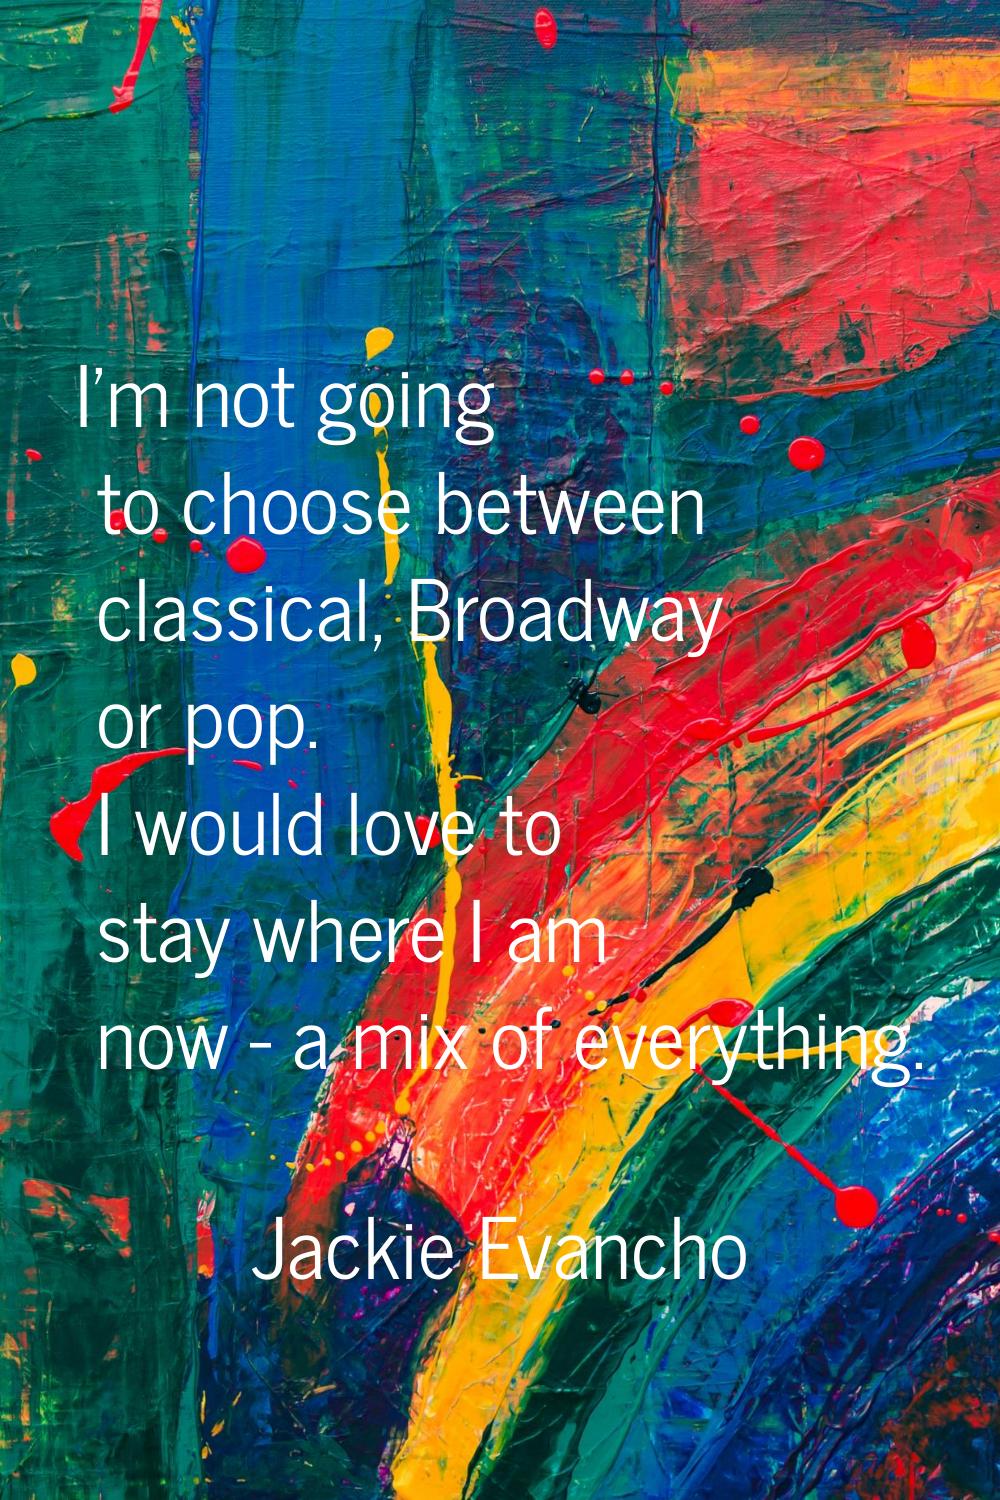 I'm not going to choose between classical, Broadway or pop. I would love to stay where I am now - a